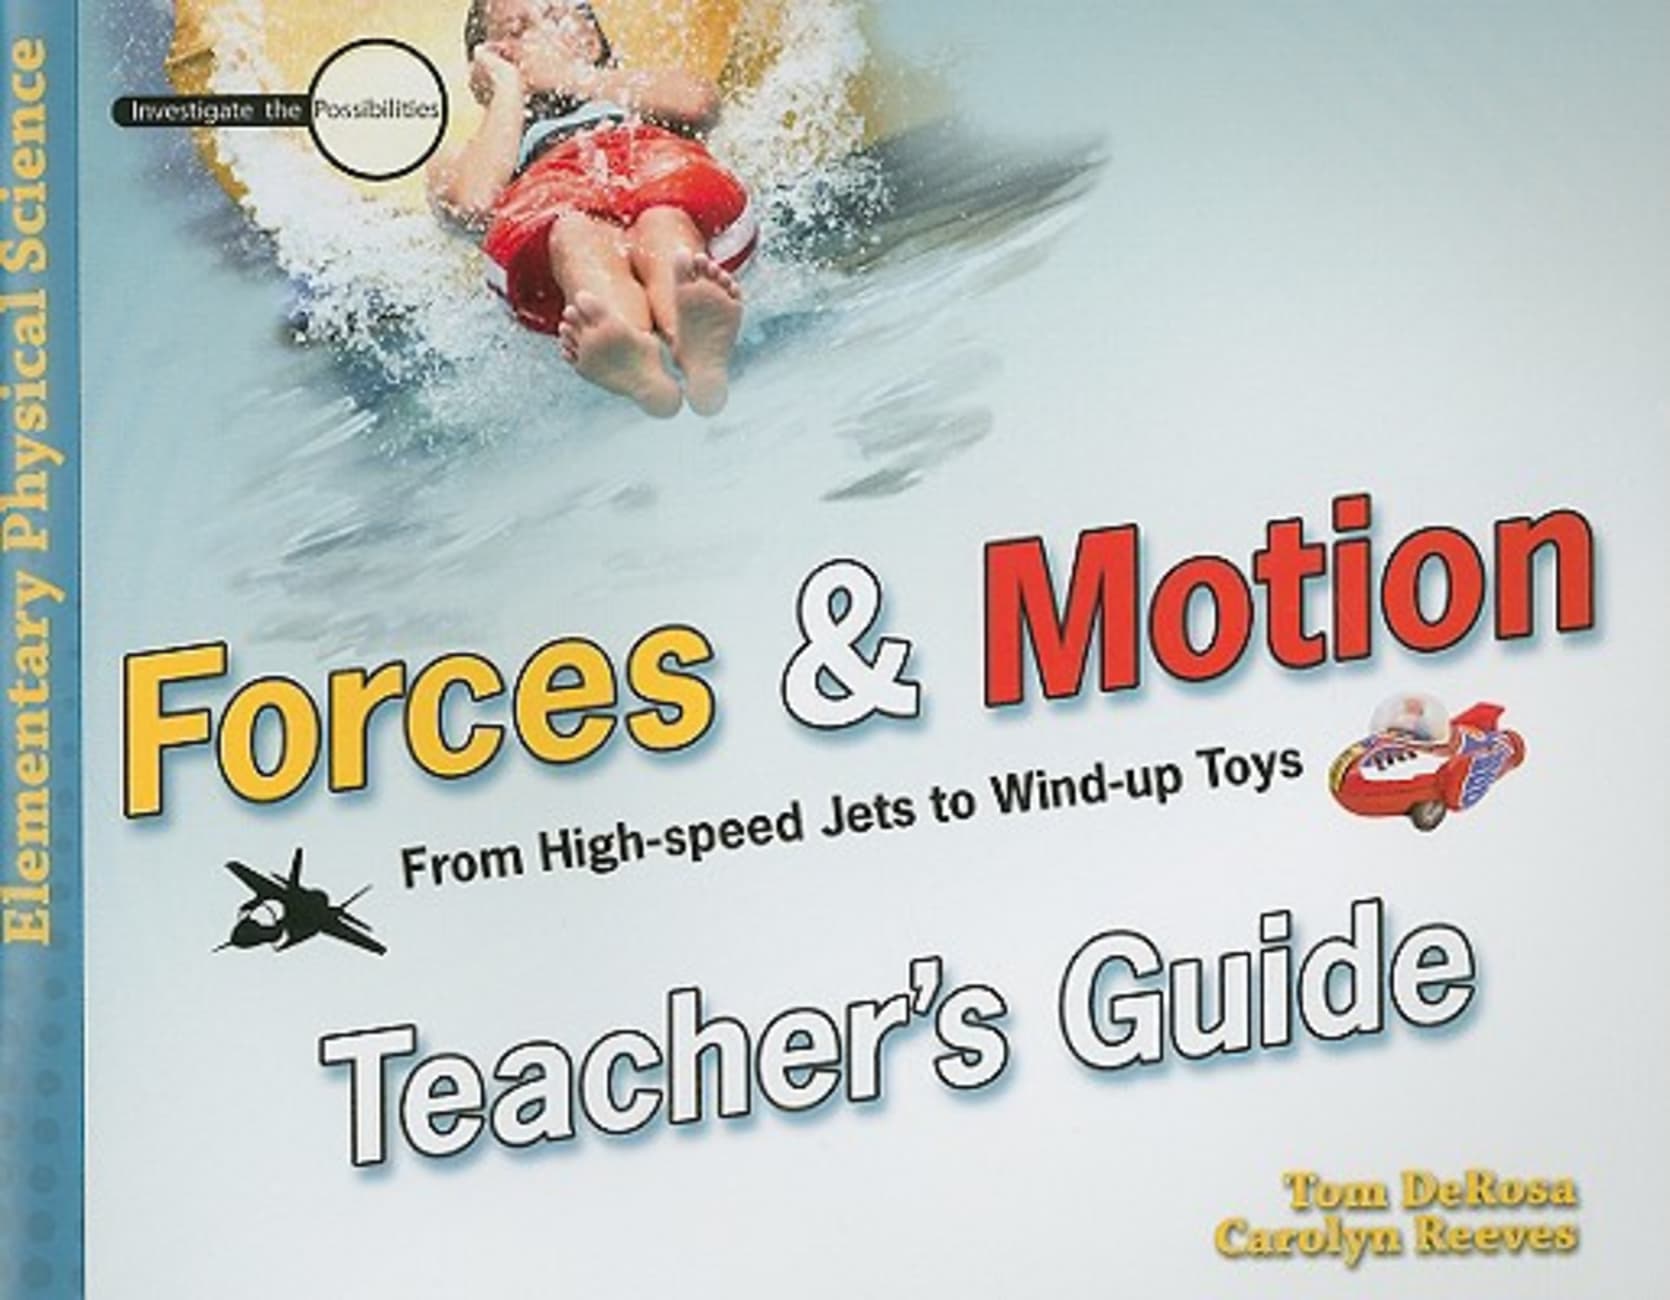 Forces and Motion (Teacher's Guide) (Elementary Science Series) Paperback